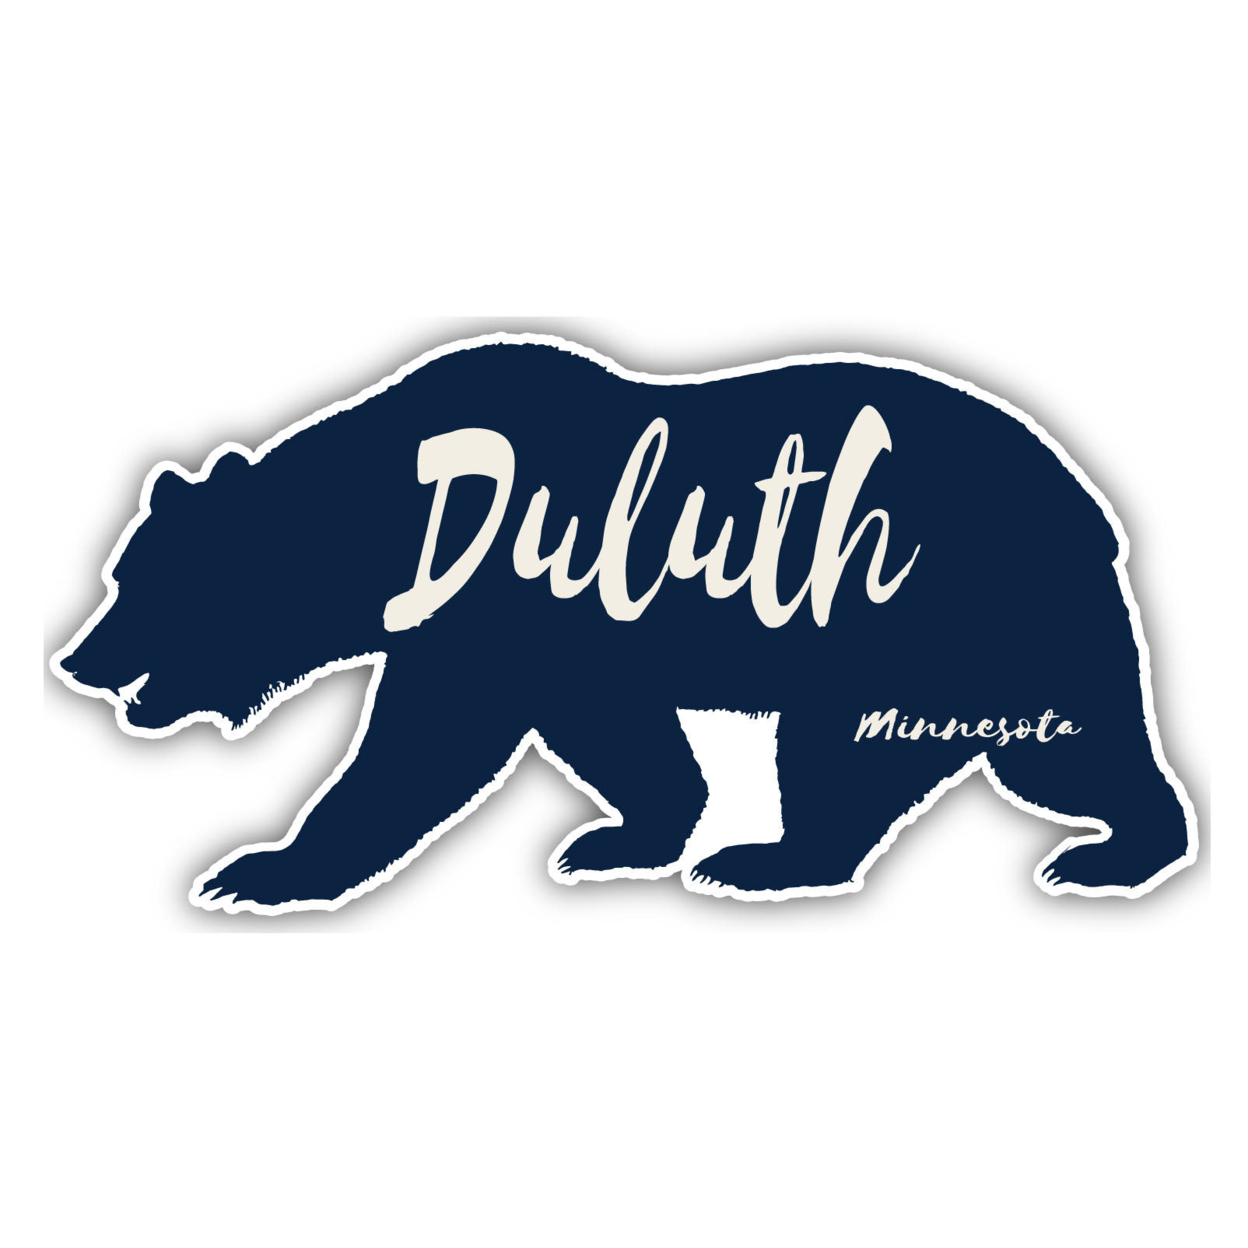 Duluth Minnesota Souvenir Decorative Stickers (Choose Theme And Size) - 4-Pack, 2-Inch, Bear